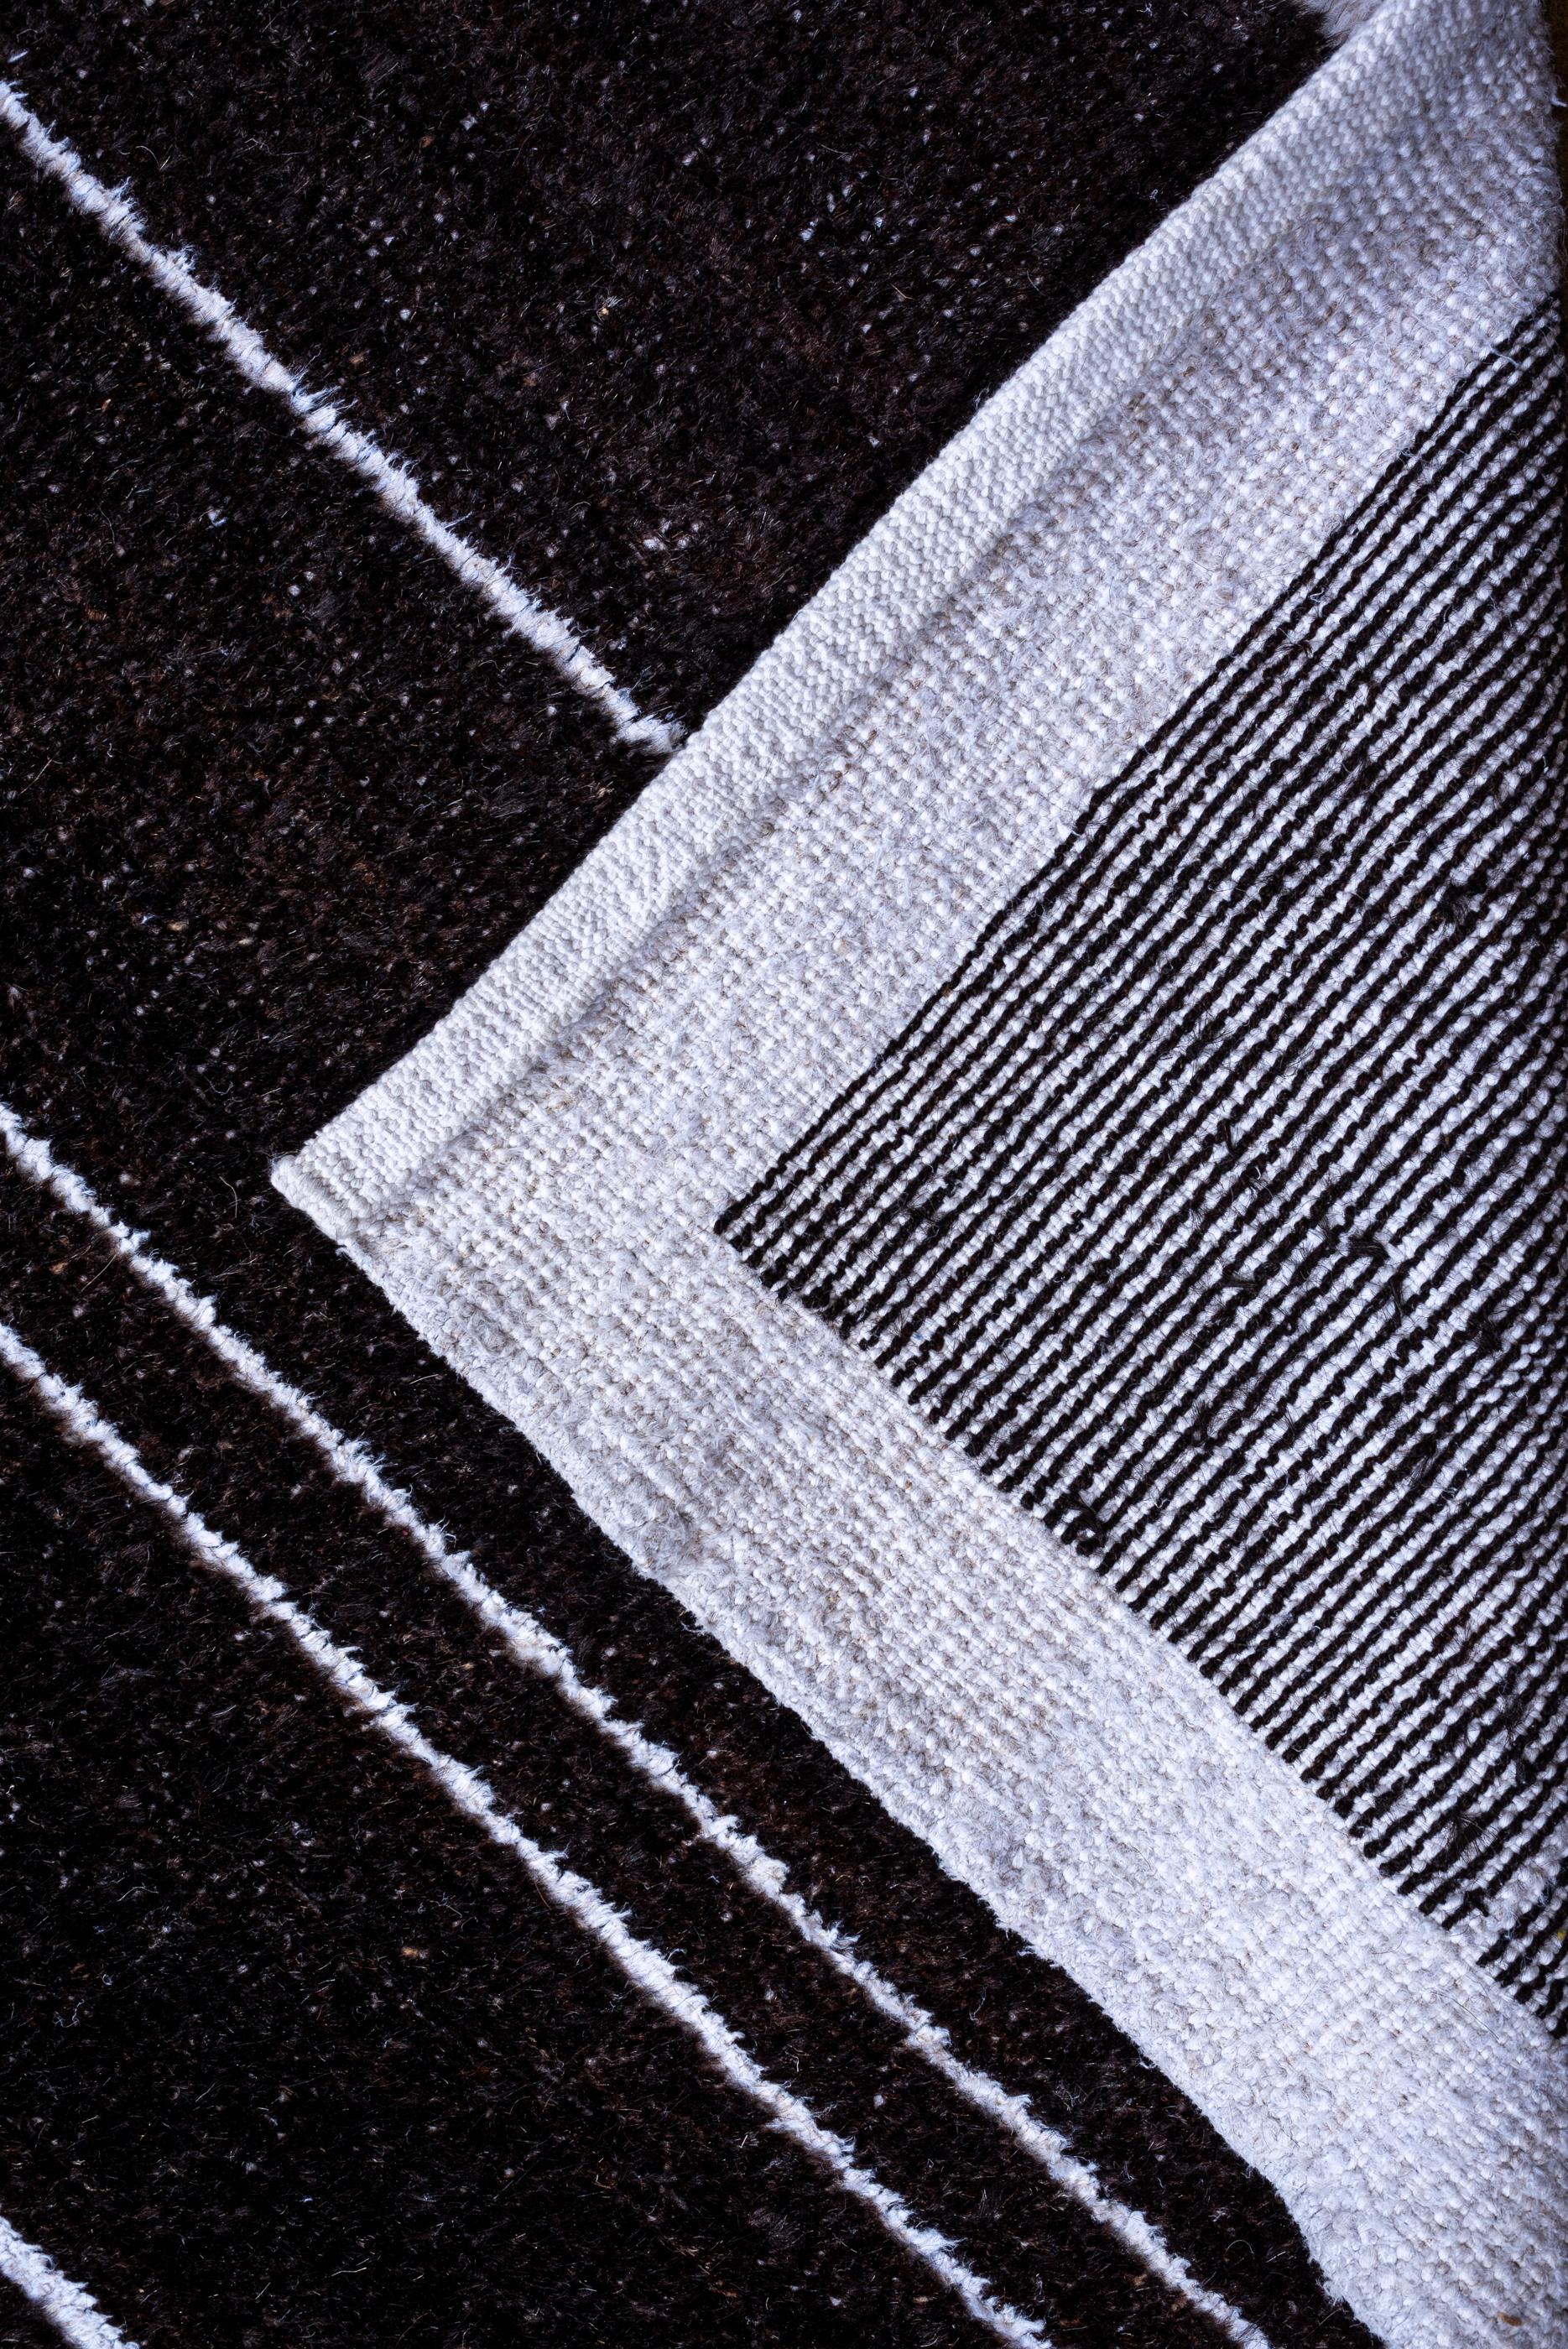 Wool Unique Black and White Modern Contemporary Rug Design For Sale